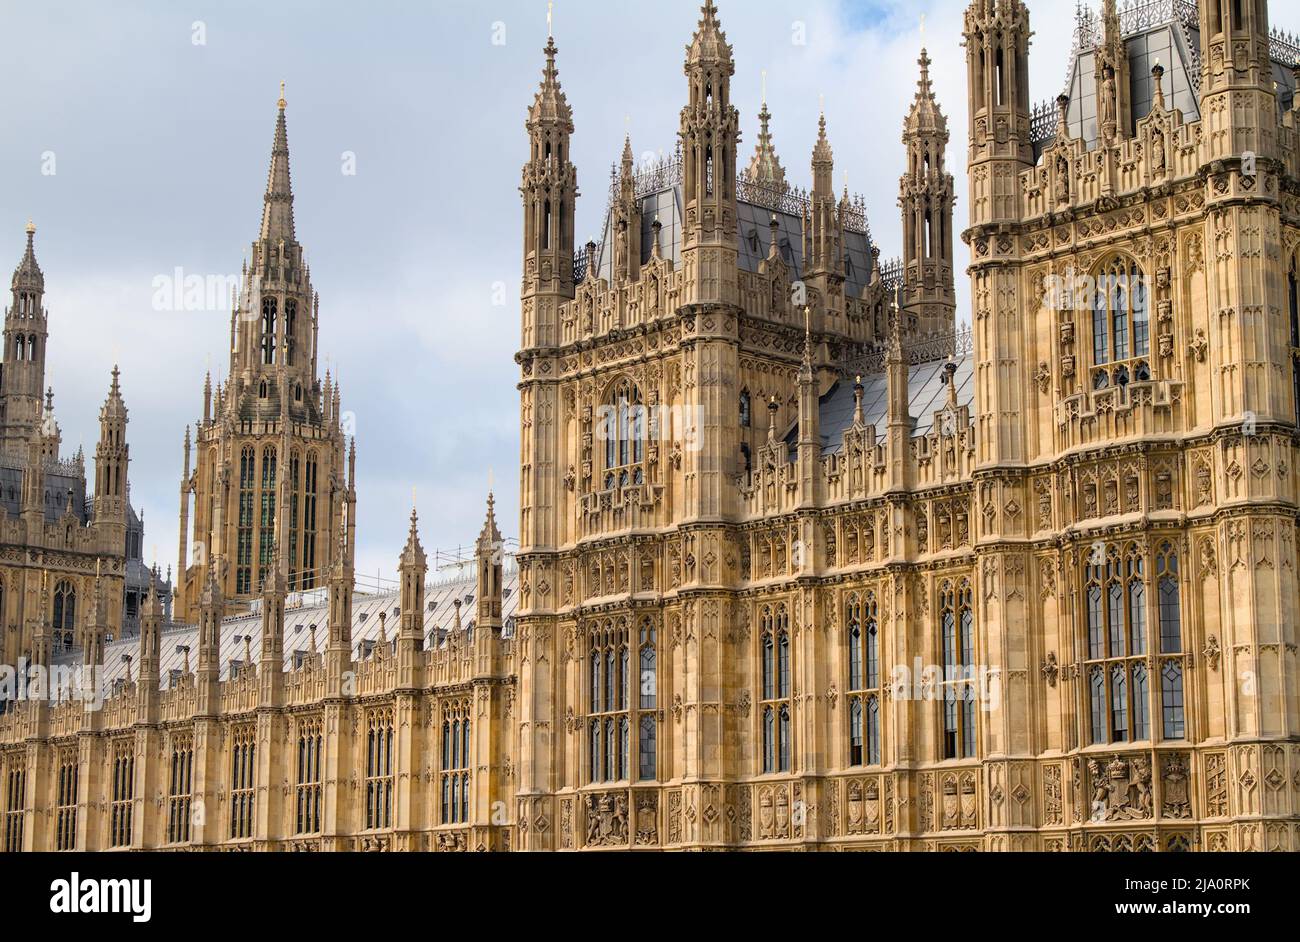 Side View Of The Palace Of Westminster, Houses Of Parliament Showing The Central Tower, London UK Stock Photo